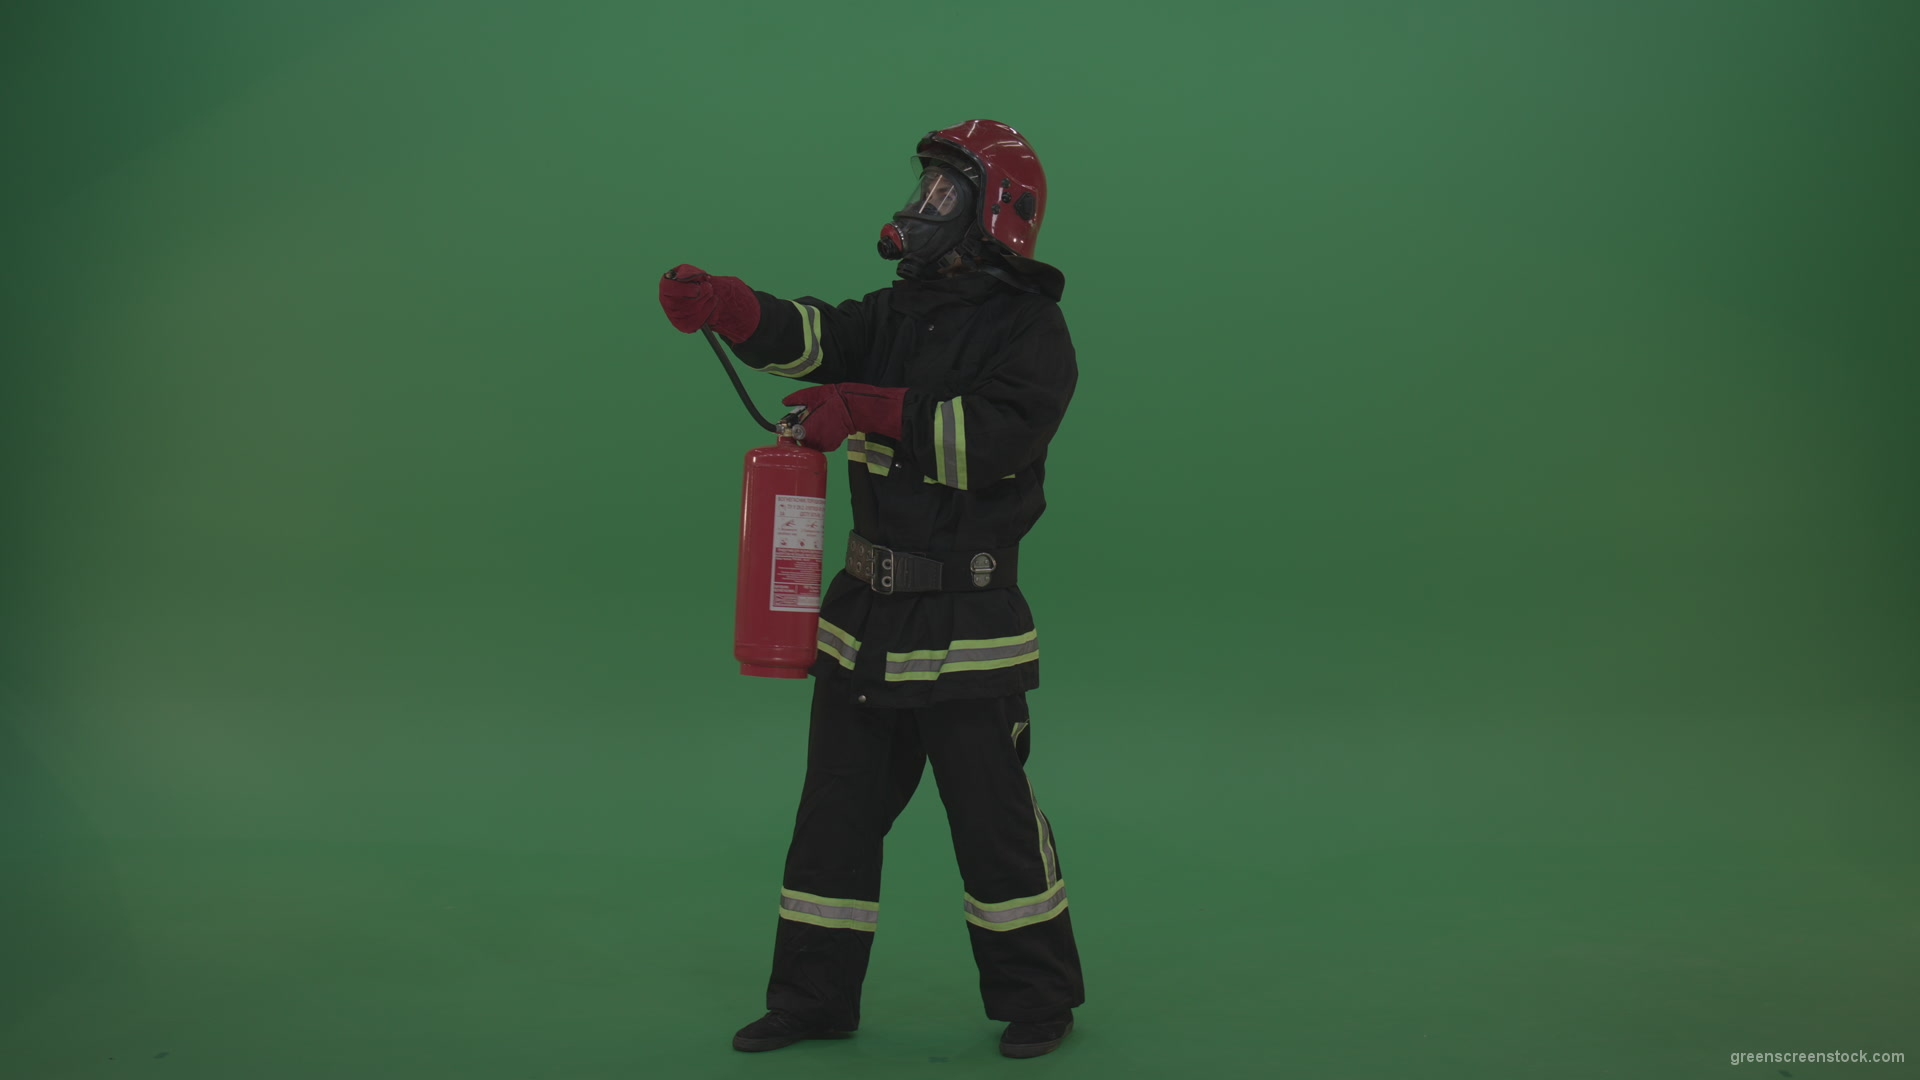 Young_Fireman_Wearing_Full_Working_Kit_Holding_Fire_Extinguisher_Sprays_Around_Fighting_Fire_And_Keeps_On_Running_On_Green_Screen_Chroma_Key_Wall_Background_006 Green Screen Stock